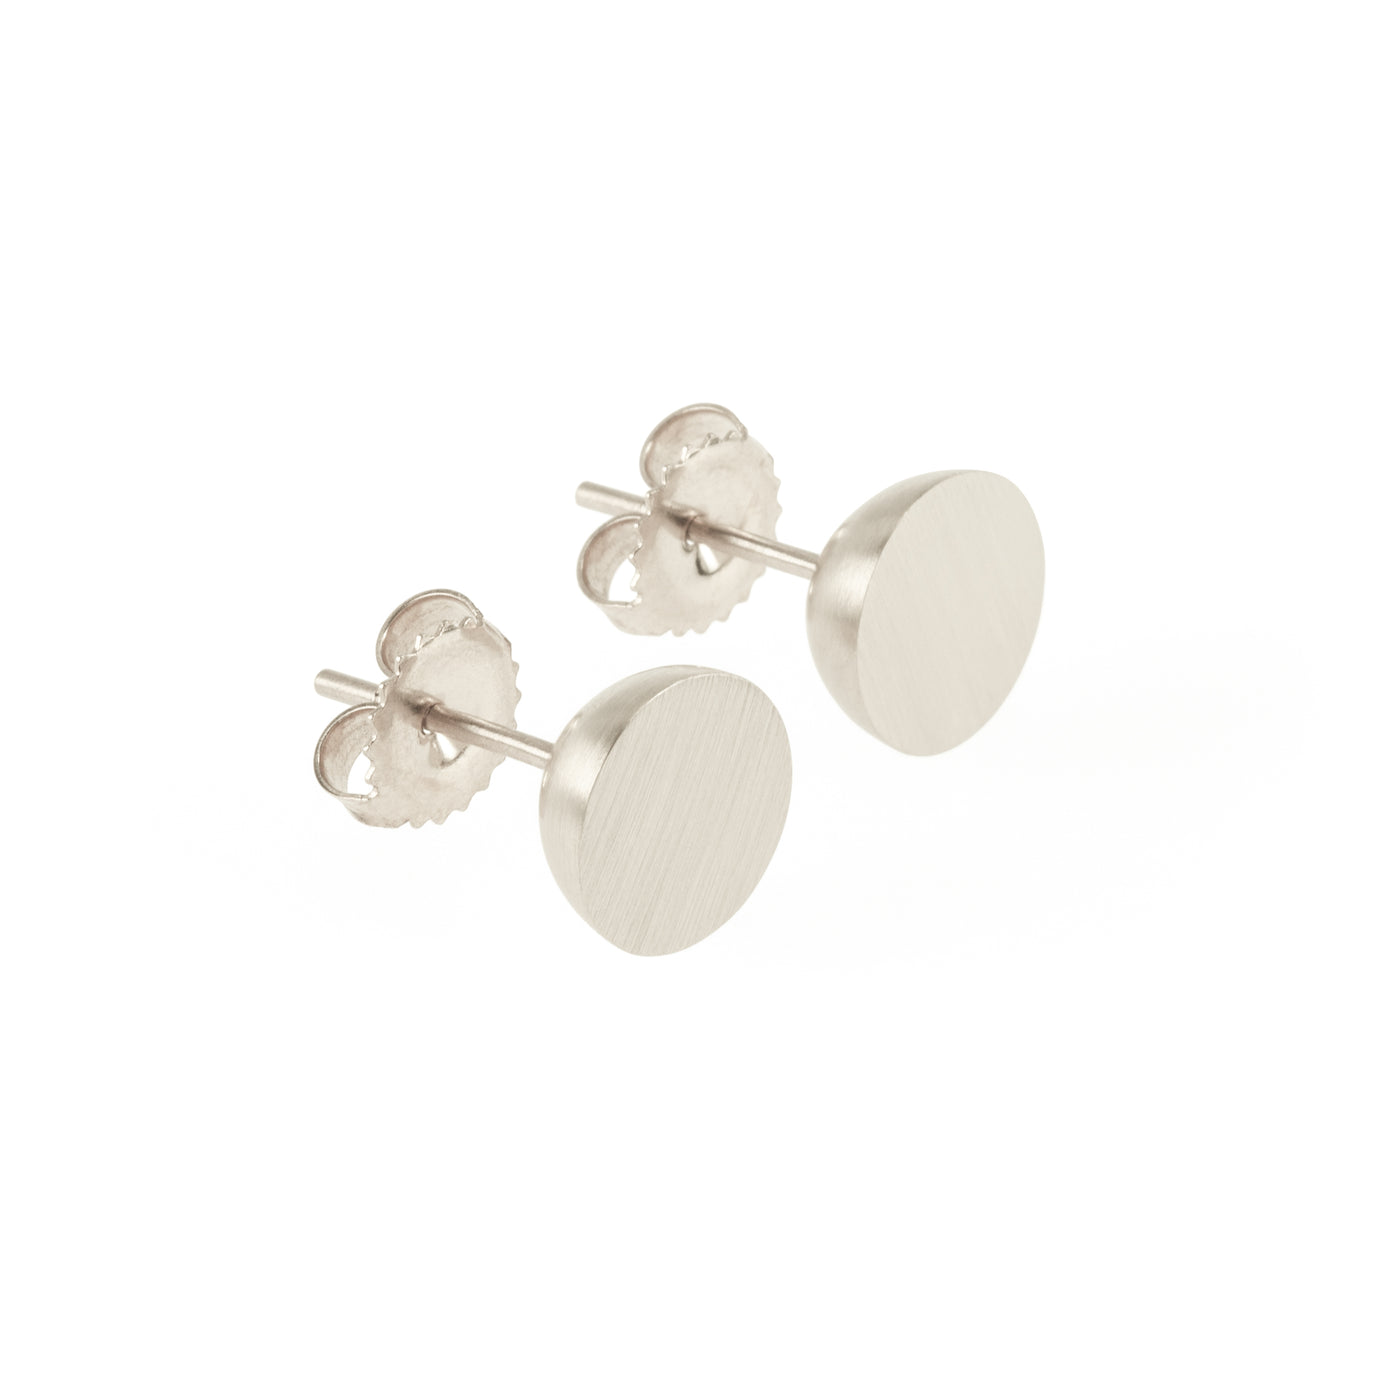 Ethical silver earrings. These minimalist 9mm Hemisphere Studs are handmade in Cape Town in recycled silver from e-waste.